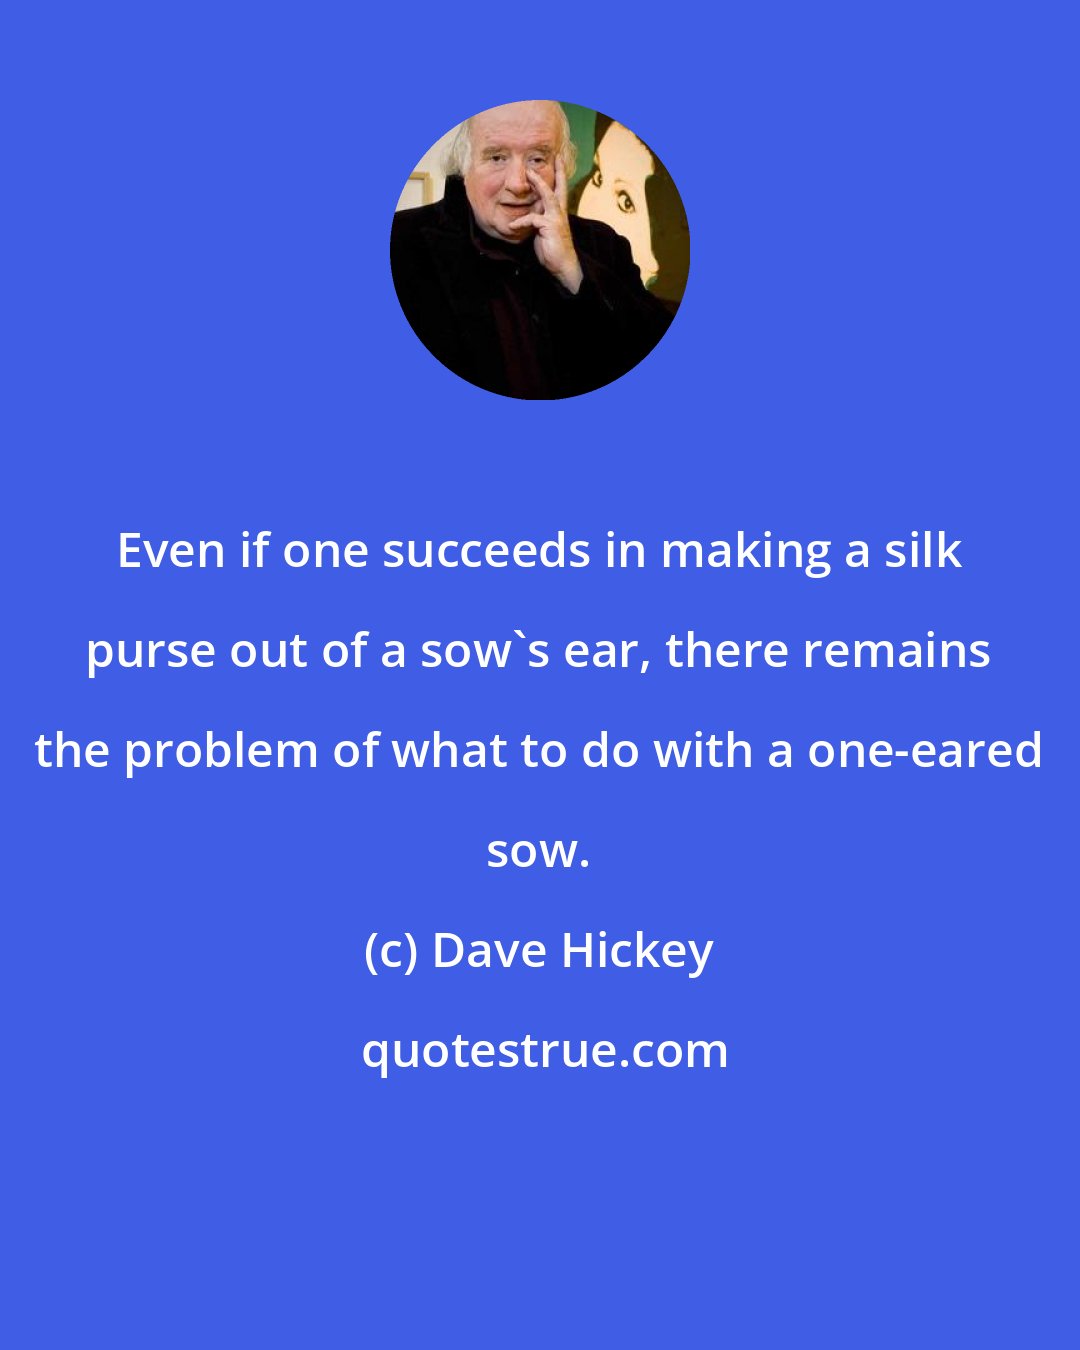 Dave Hickey: Even if one succeeds in making a silk purse out of a sow's ear, there remains the problem of what to do with a one-eared sow.